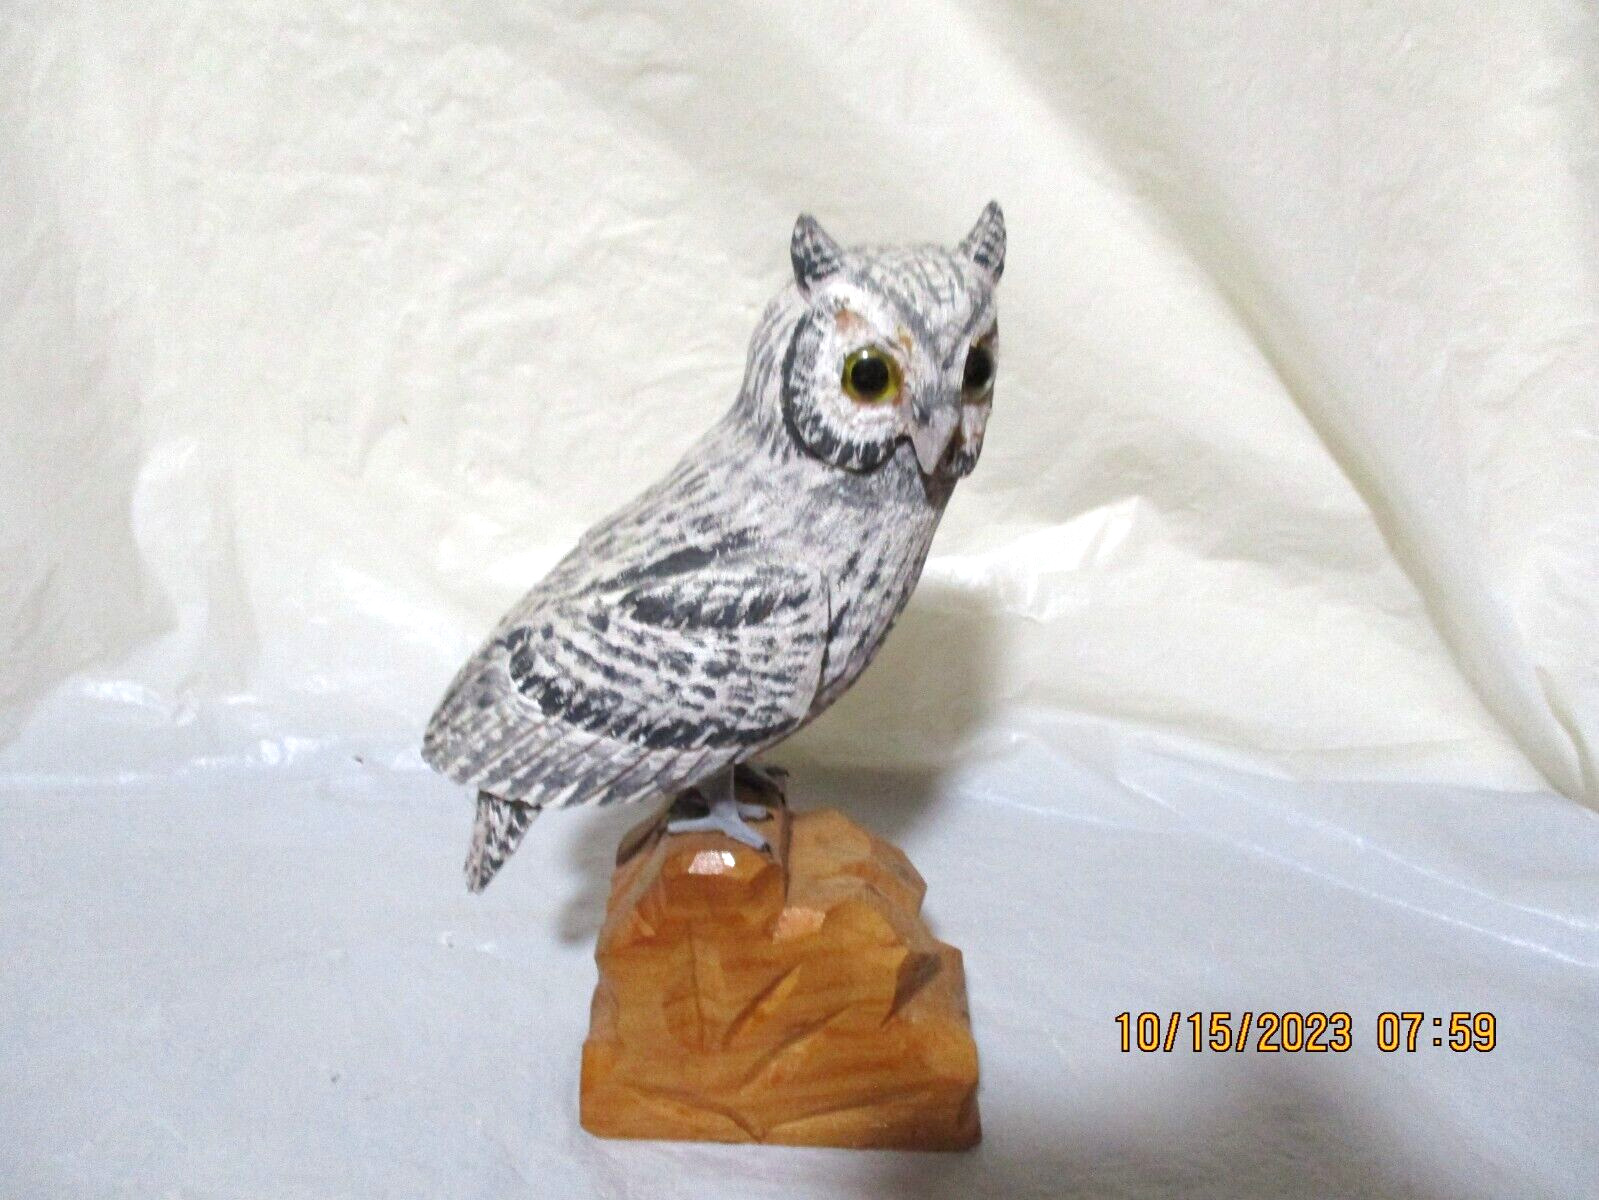 VTG 1987 Hand Carved and Painted Horned Gray & White Owl Signed Eric Gudat, 8.5